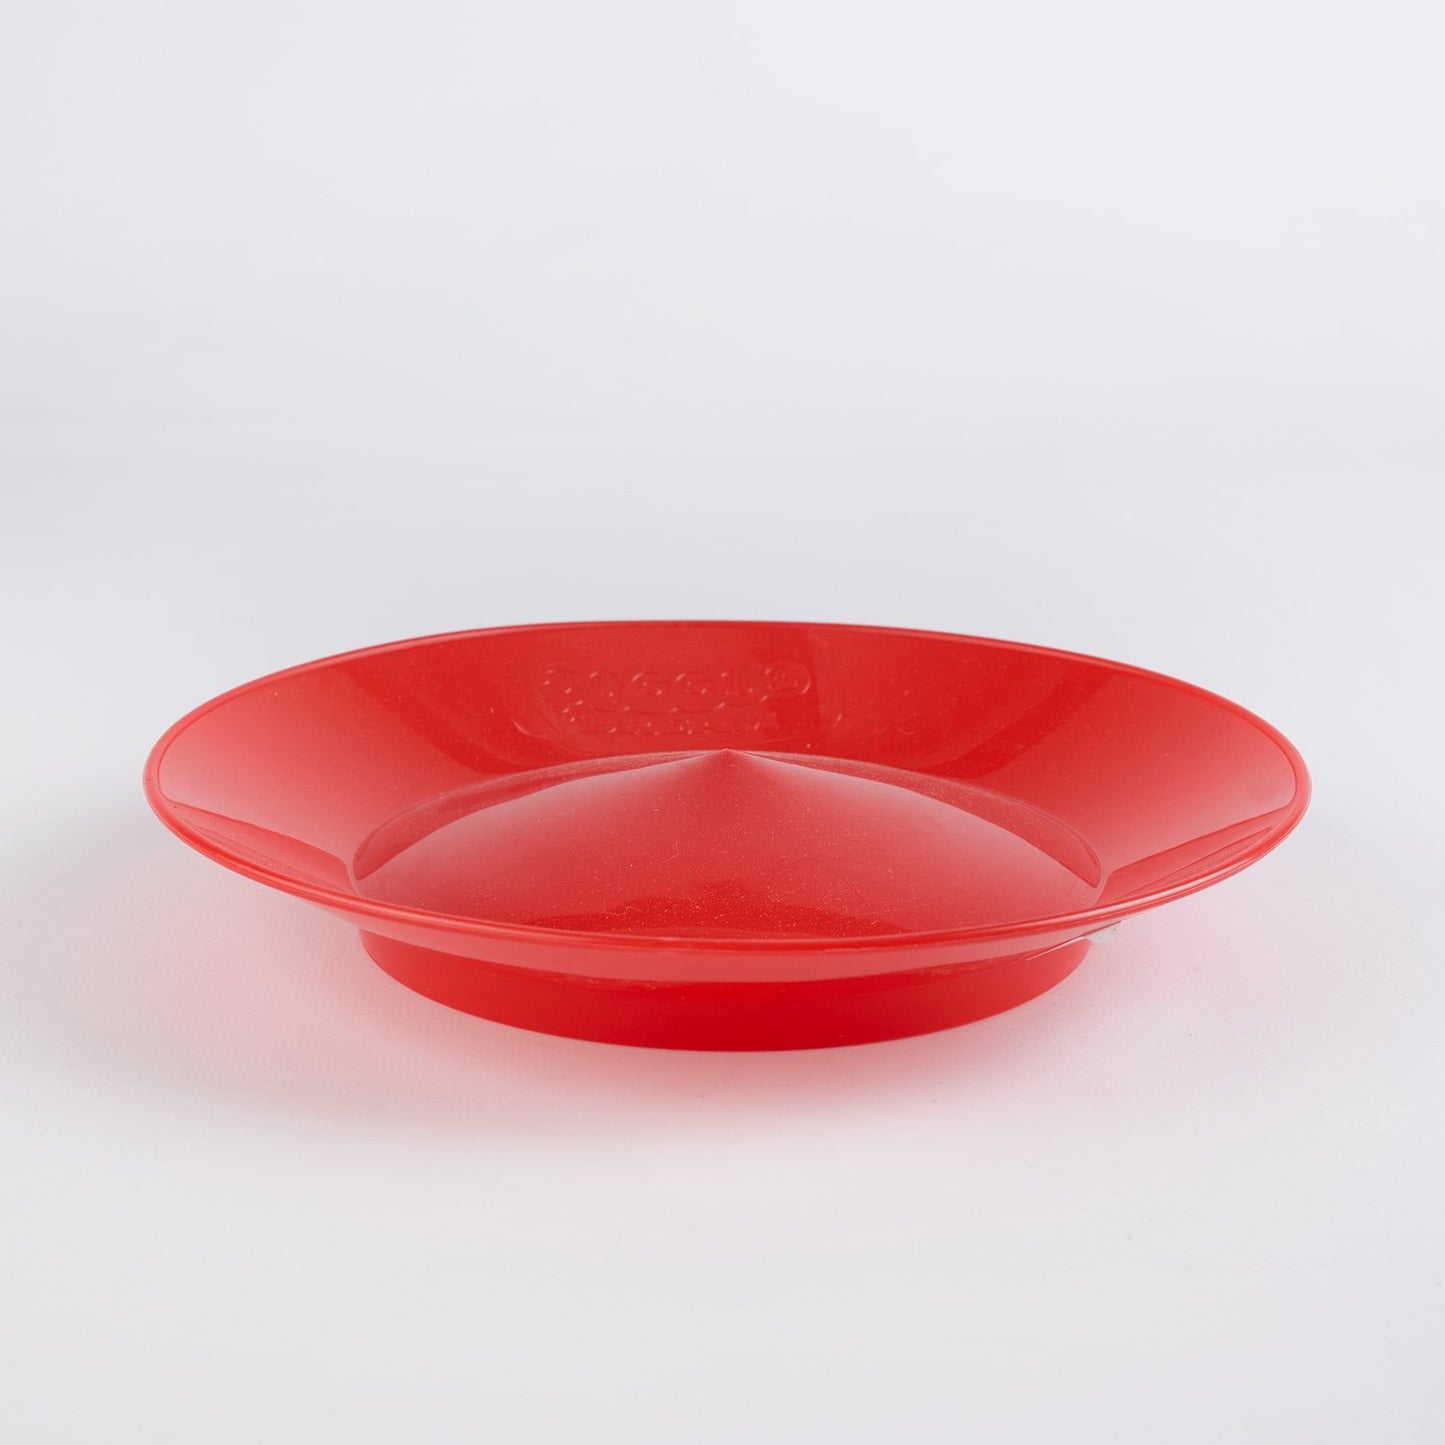 Spinning Plate (With Stick)